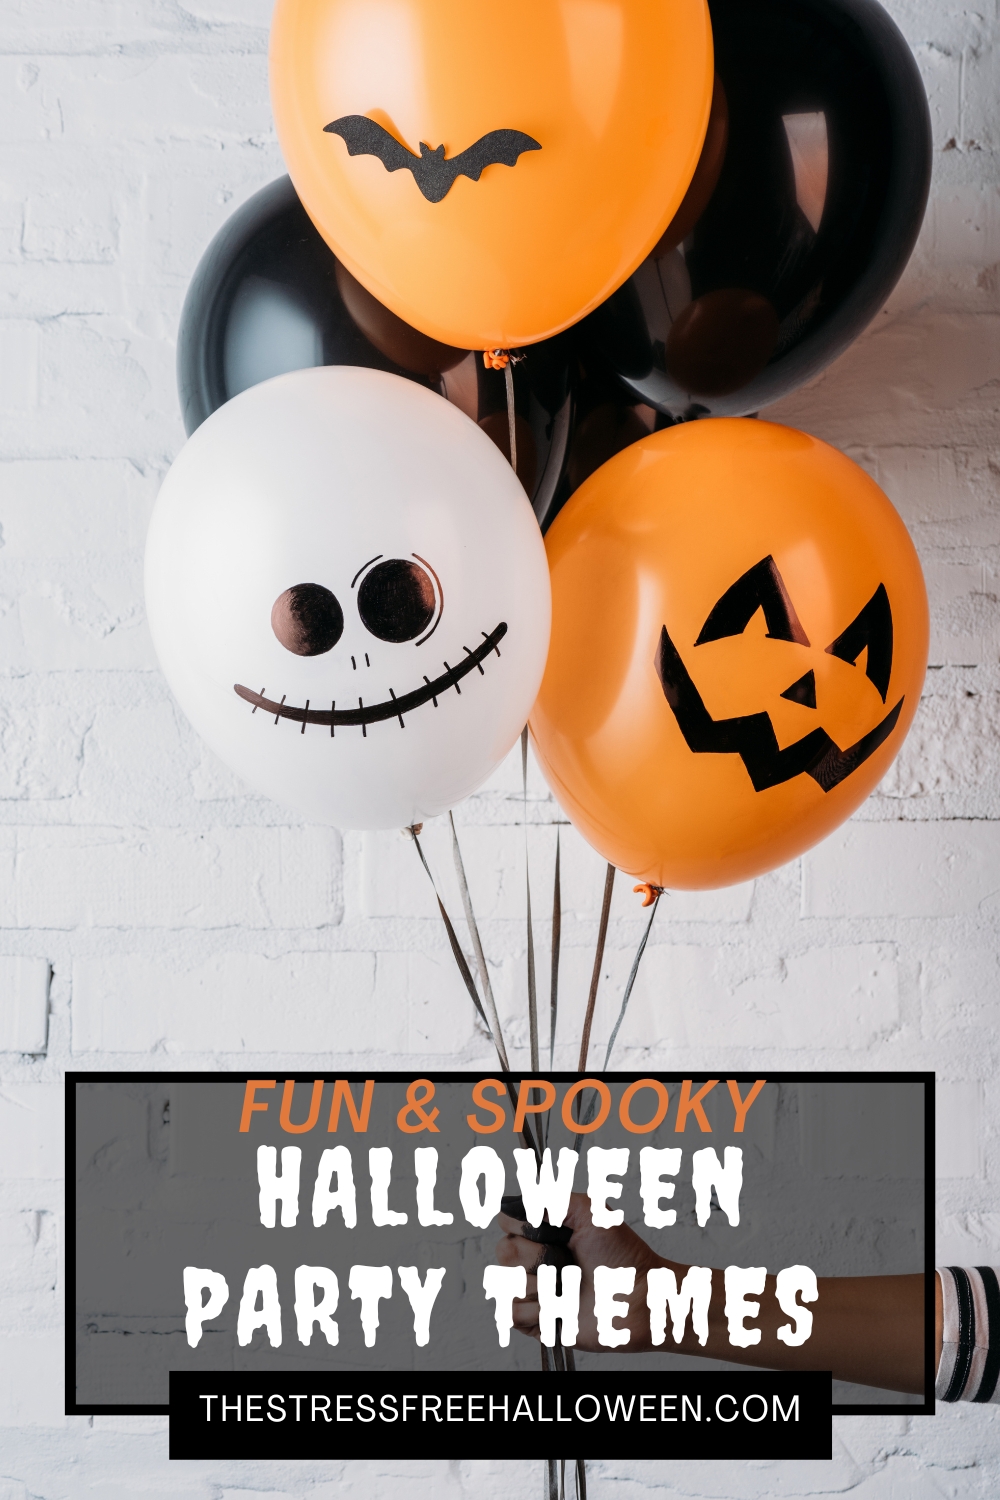 person's hand holding three halloween balloons with text overlay fun and spooky Halloween party themes